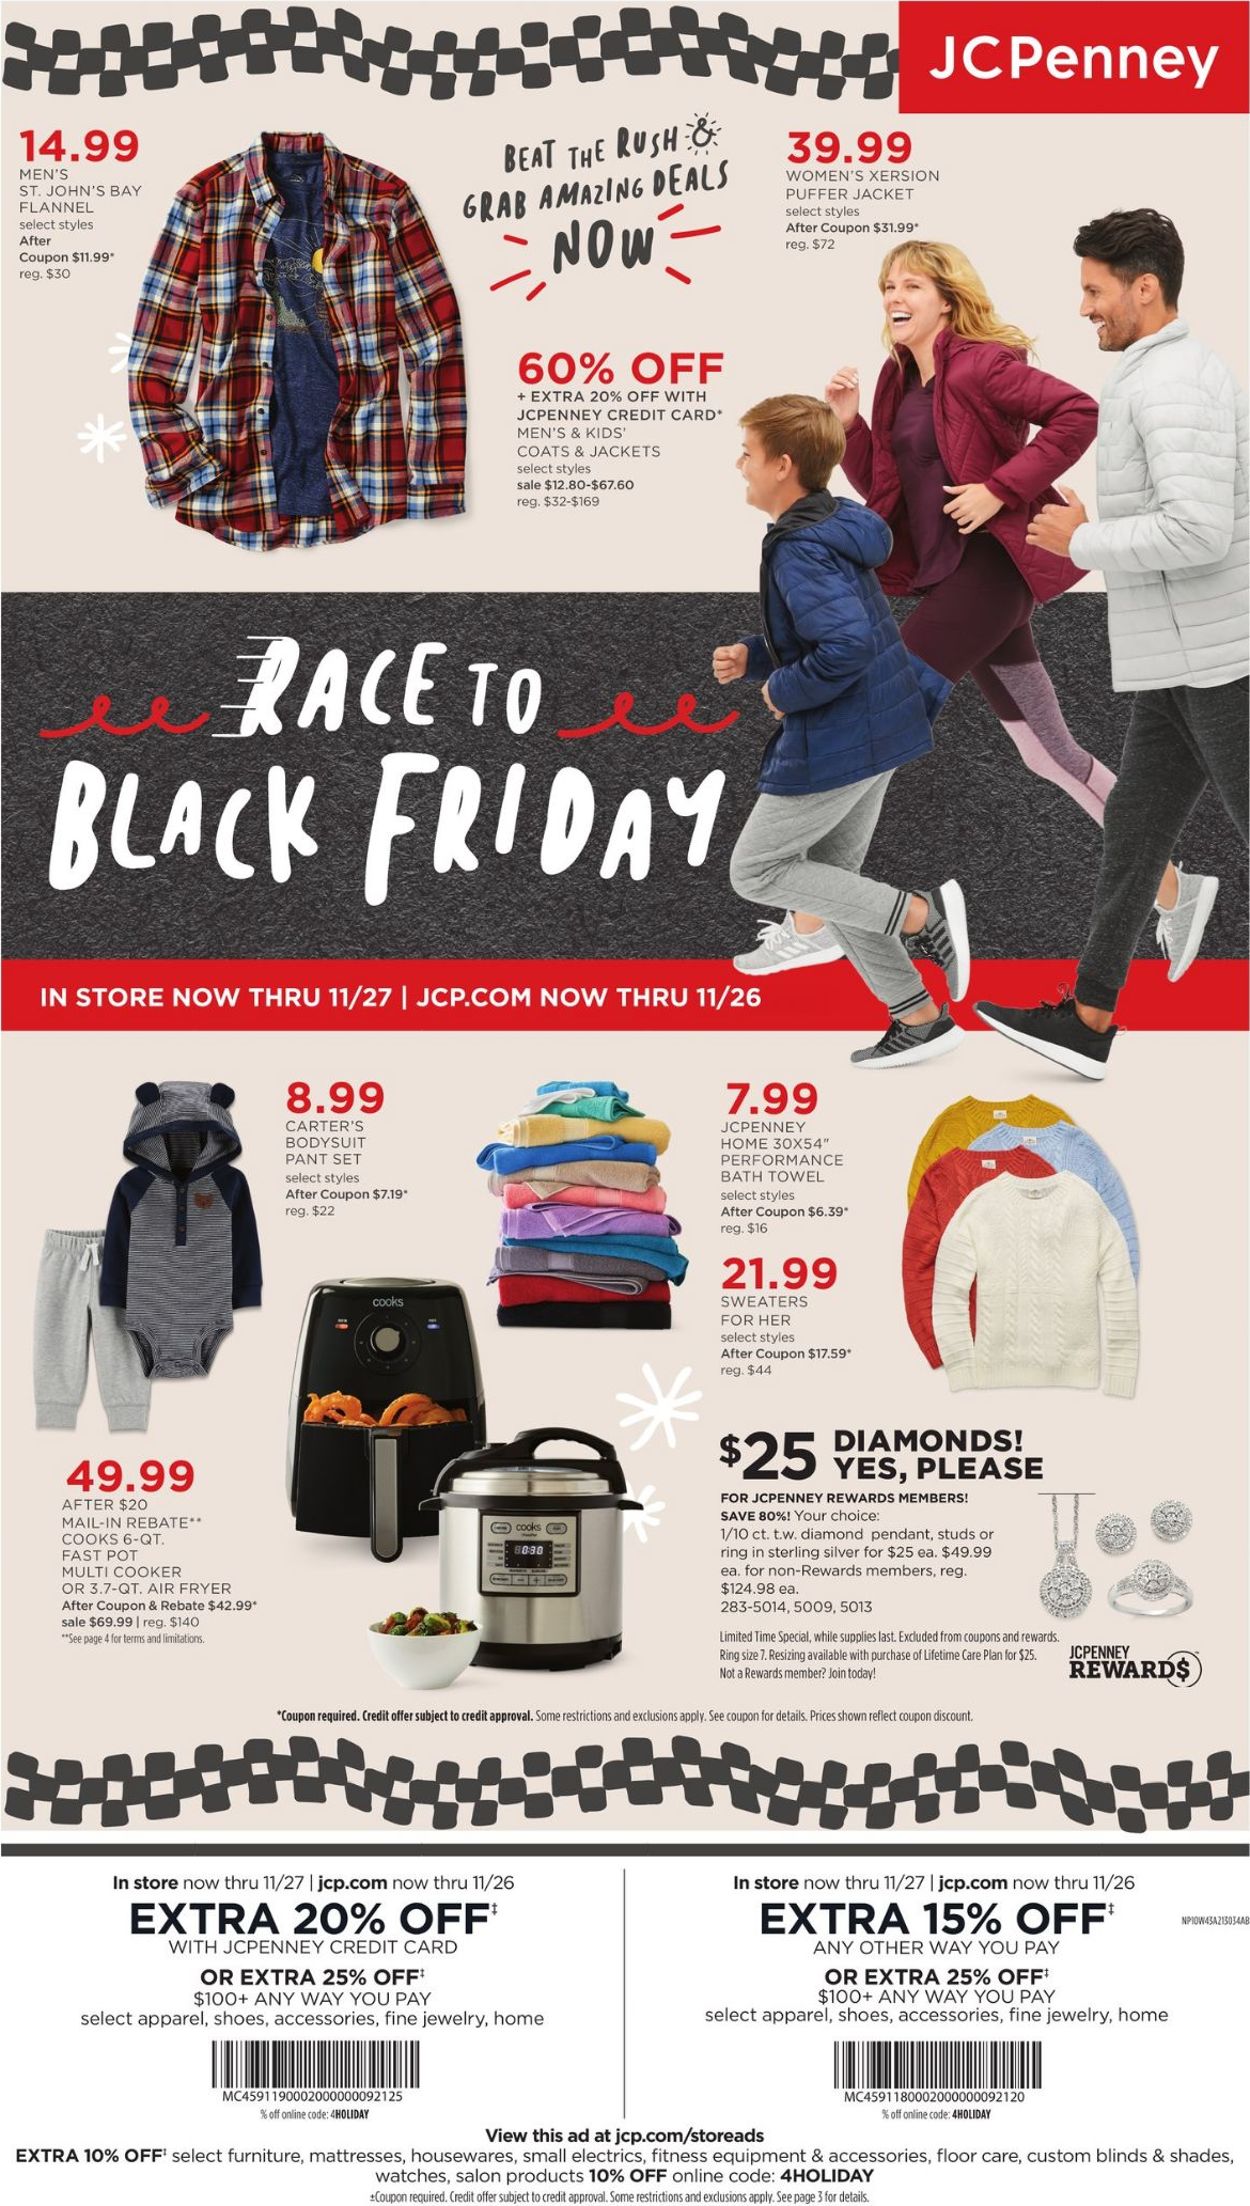 jcpenney-black-friday-ad-2019-current-weekly-ad-11-24-11-27-2019